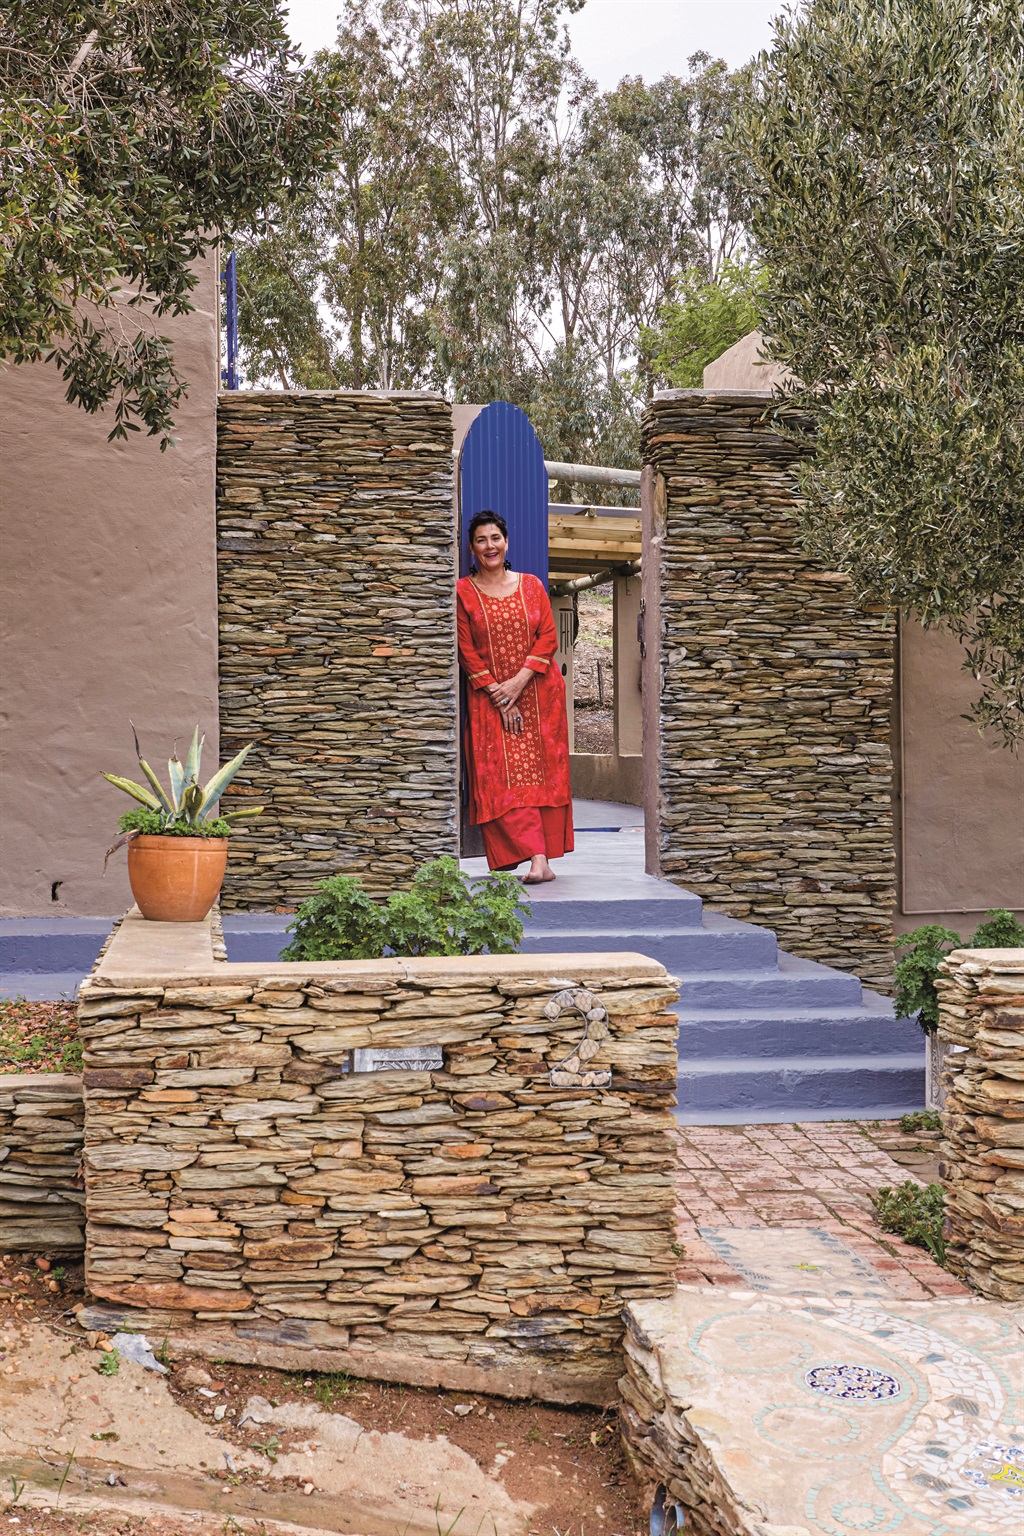 Terry says she regards Barrydale’s slate walls as being synonymous with the Little Karoo. “They’re not only beautiful, they’re also a form of landscape art. Many of the locals are skilled at stacking slate walls.”